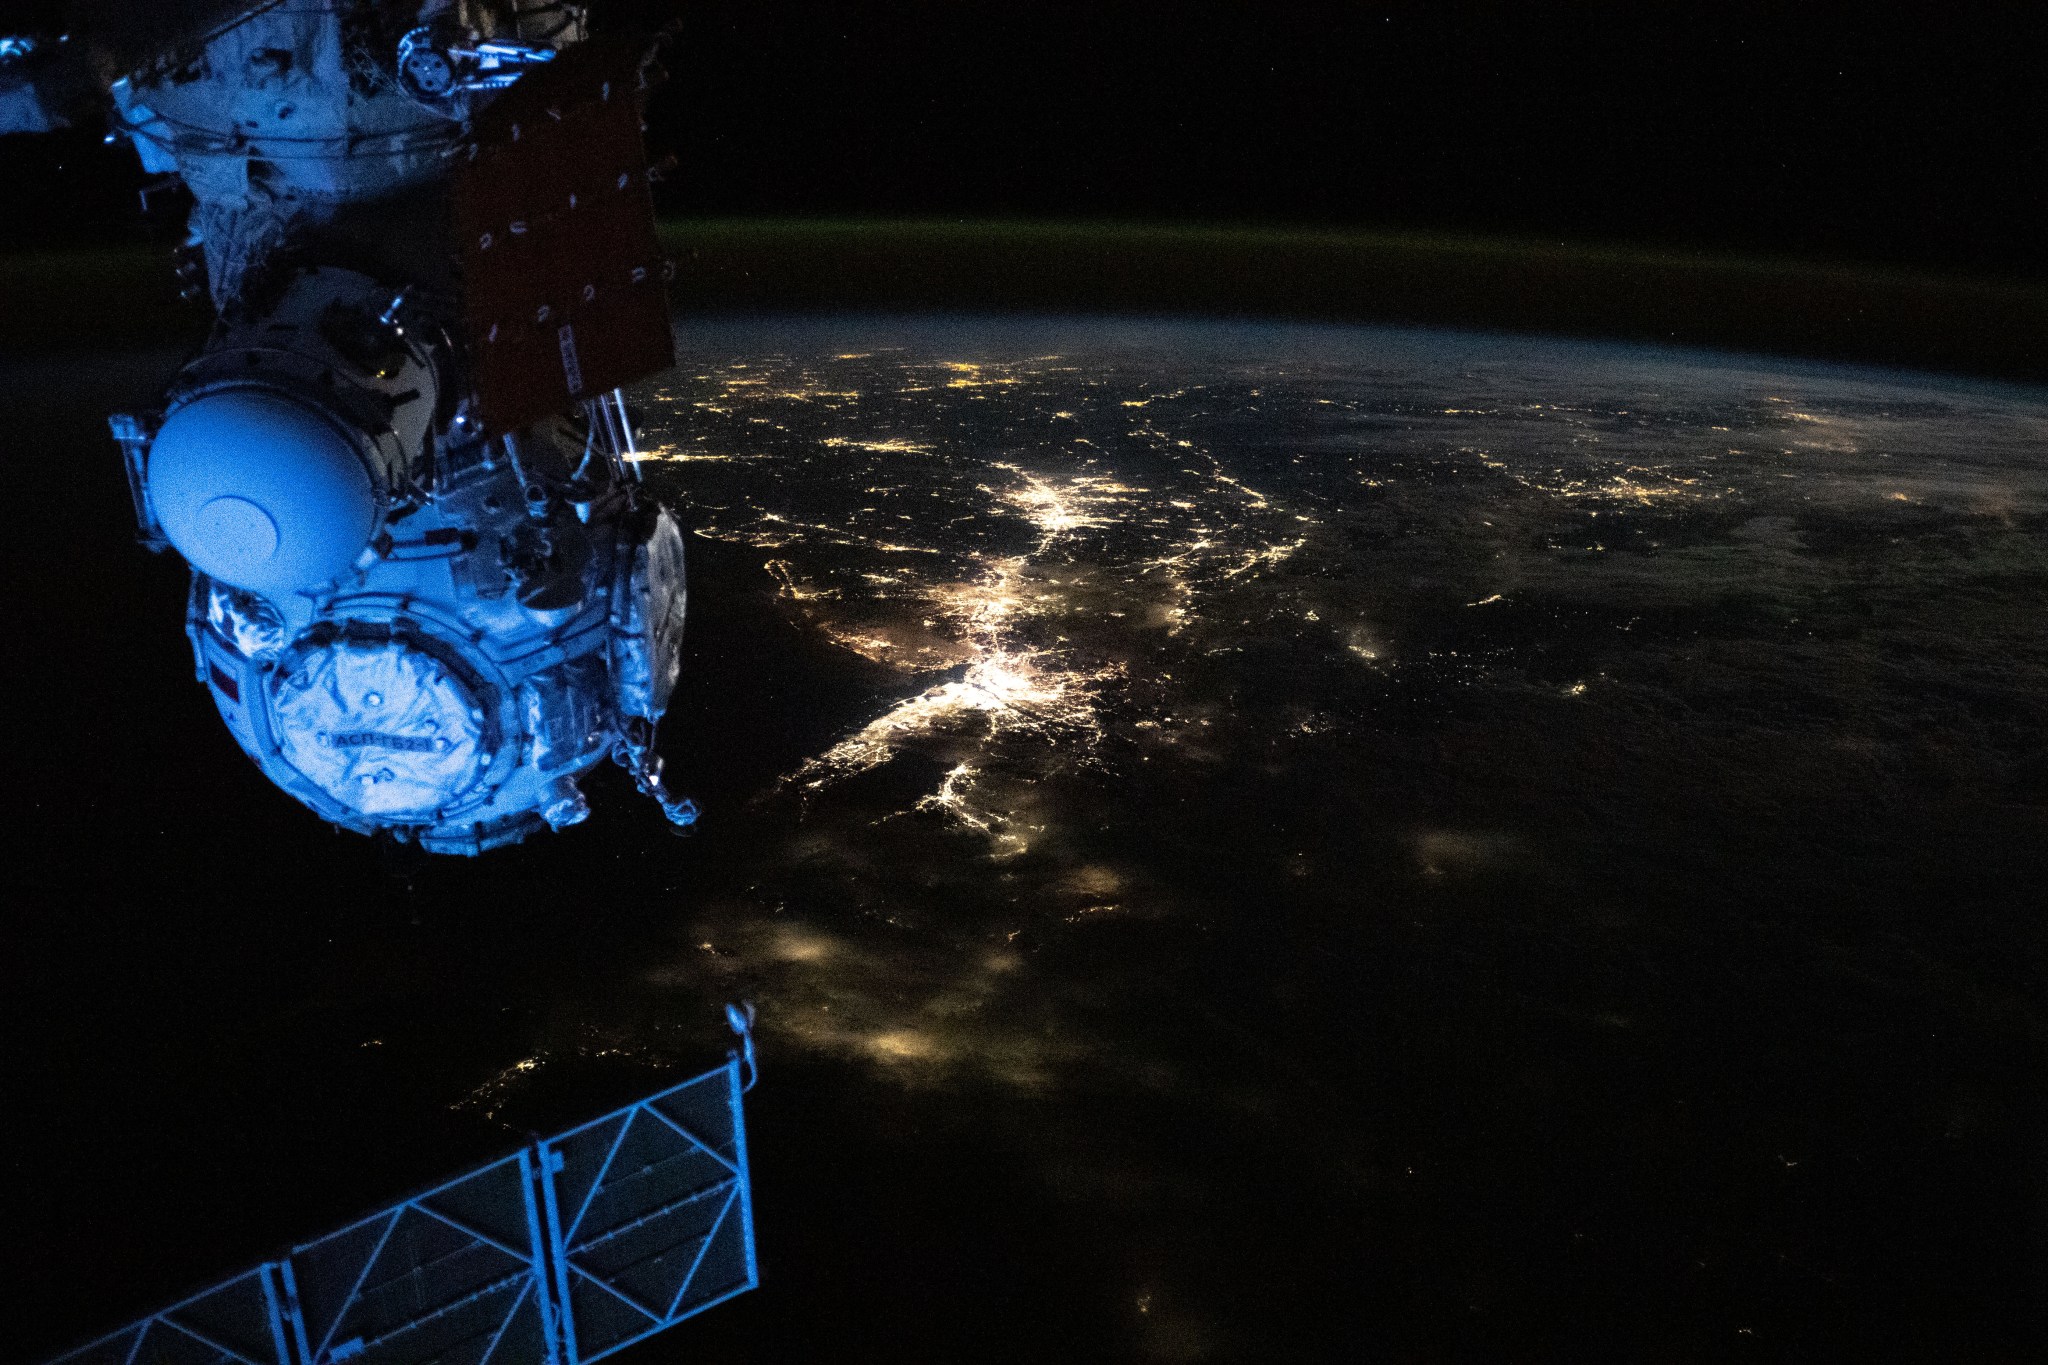 The city lights of the northeastern United States are visible from the International Space Station. The rest of the surrounding land is mostly dark, as is space. At left, part of the orbital lab and a docking port on a Russian space station module are visible.